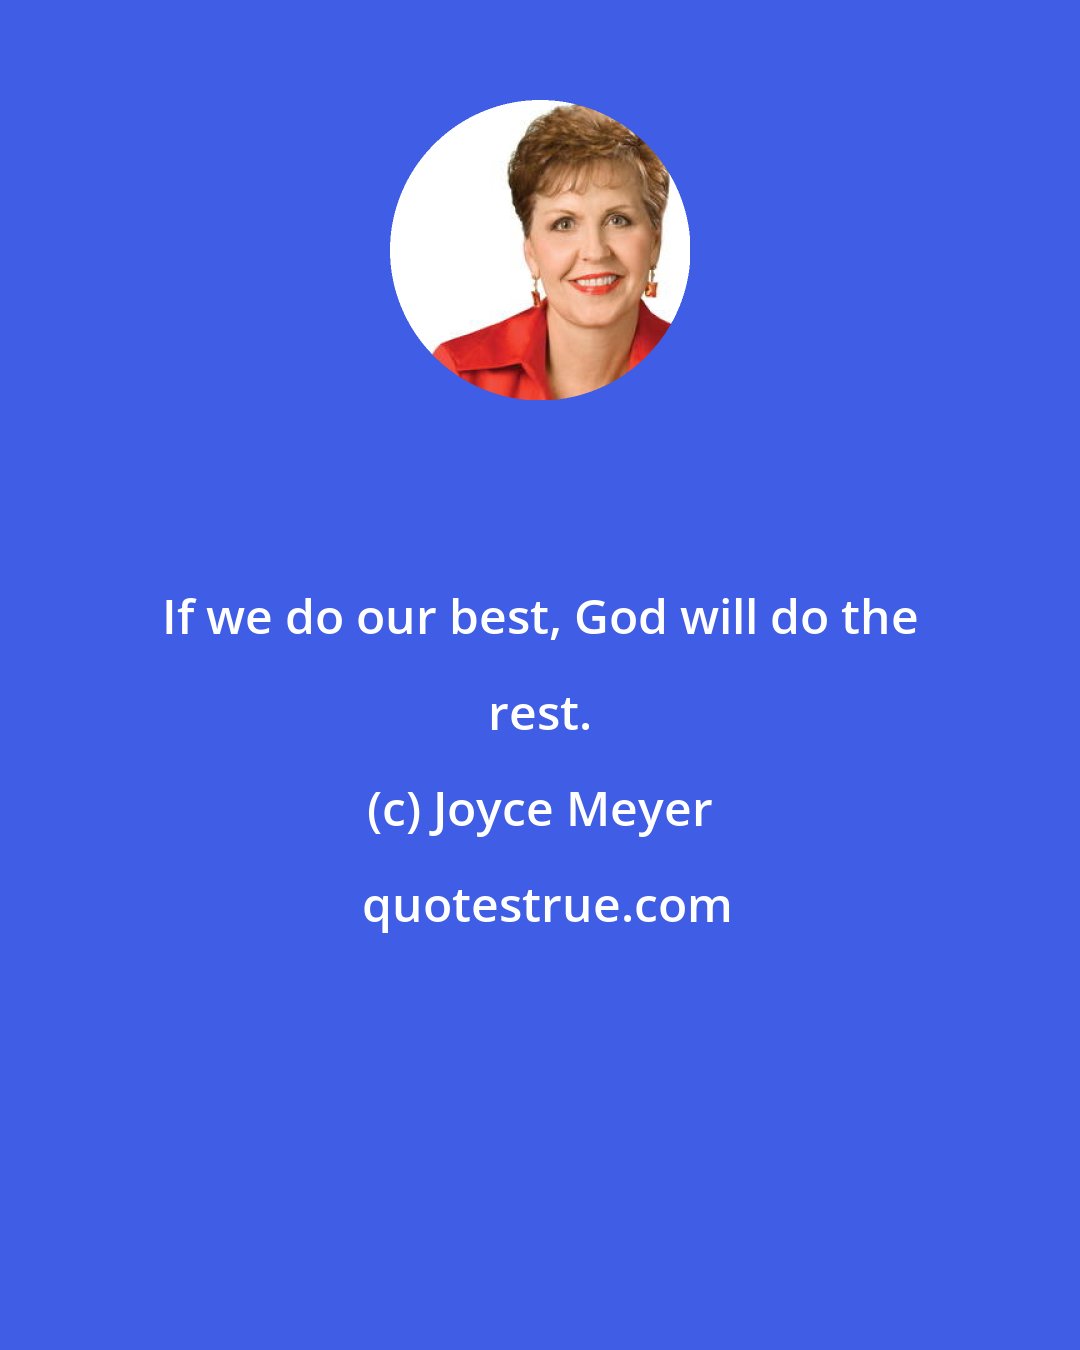 Joyce Meyer: If we do our best, God will do the rest.